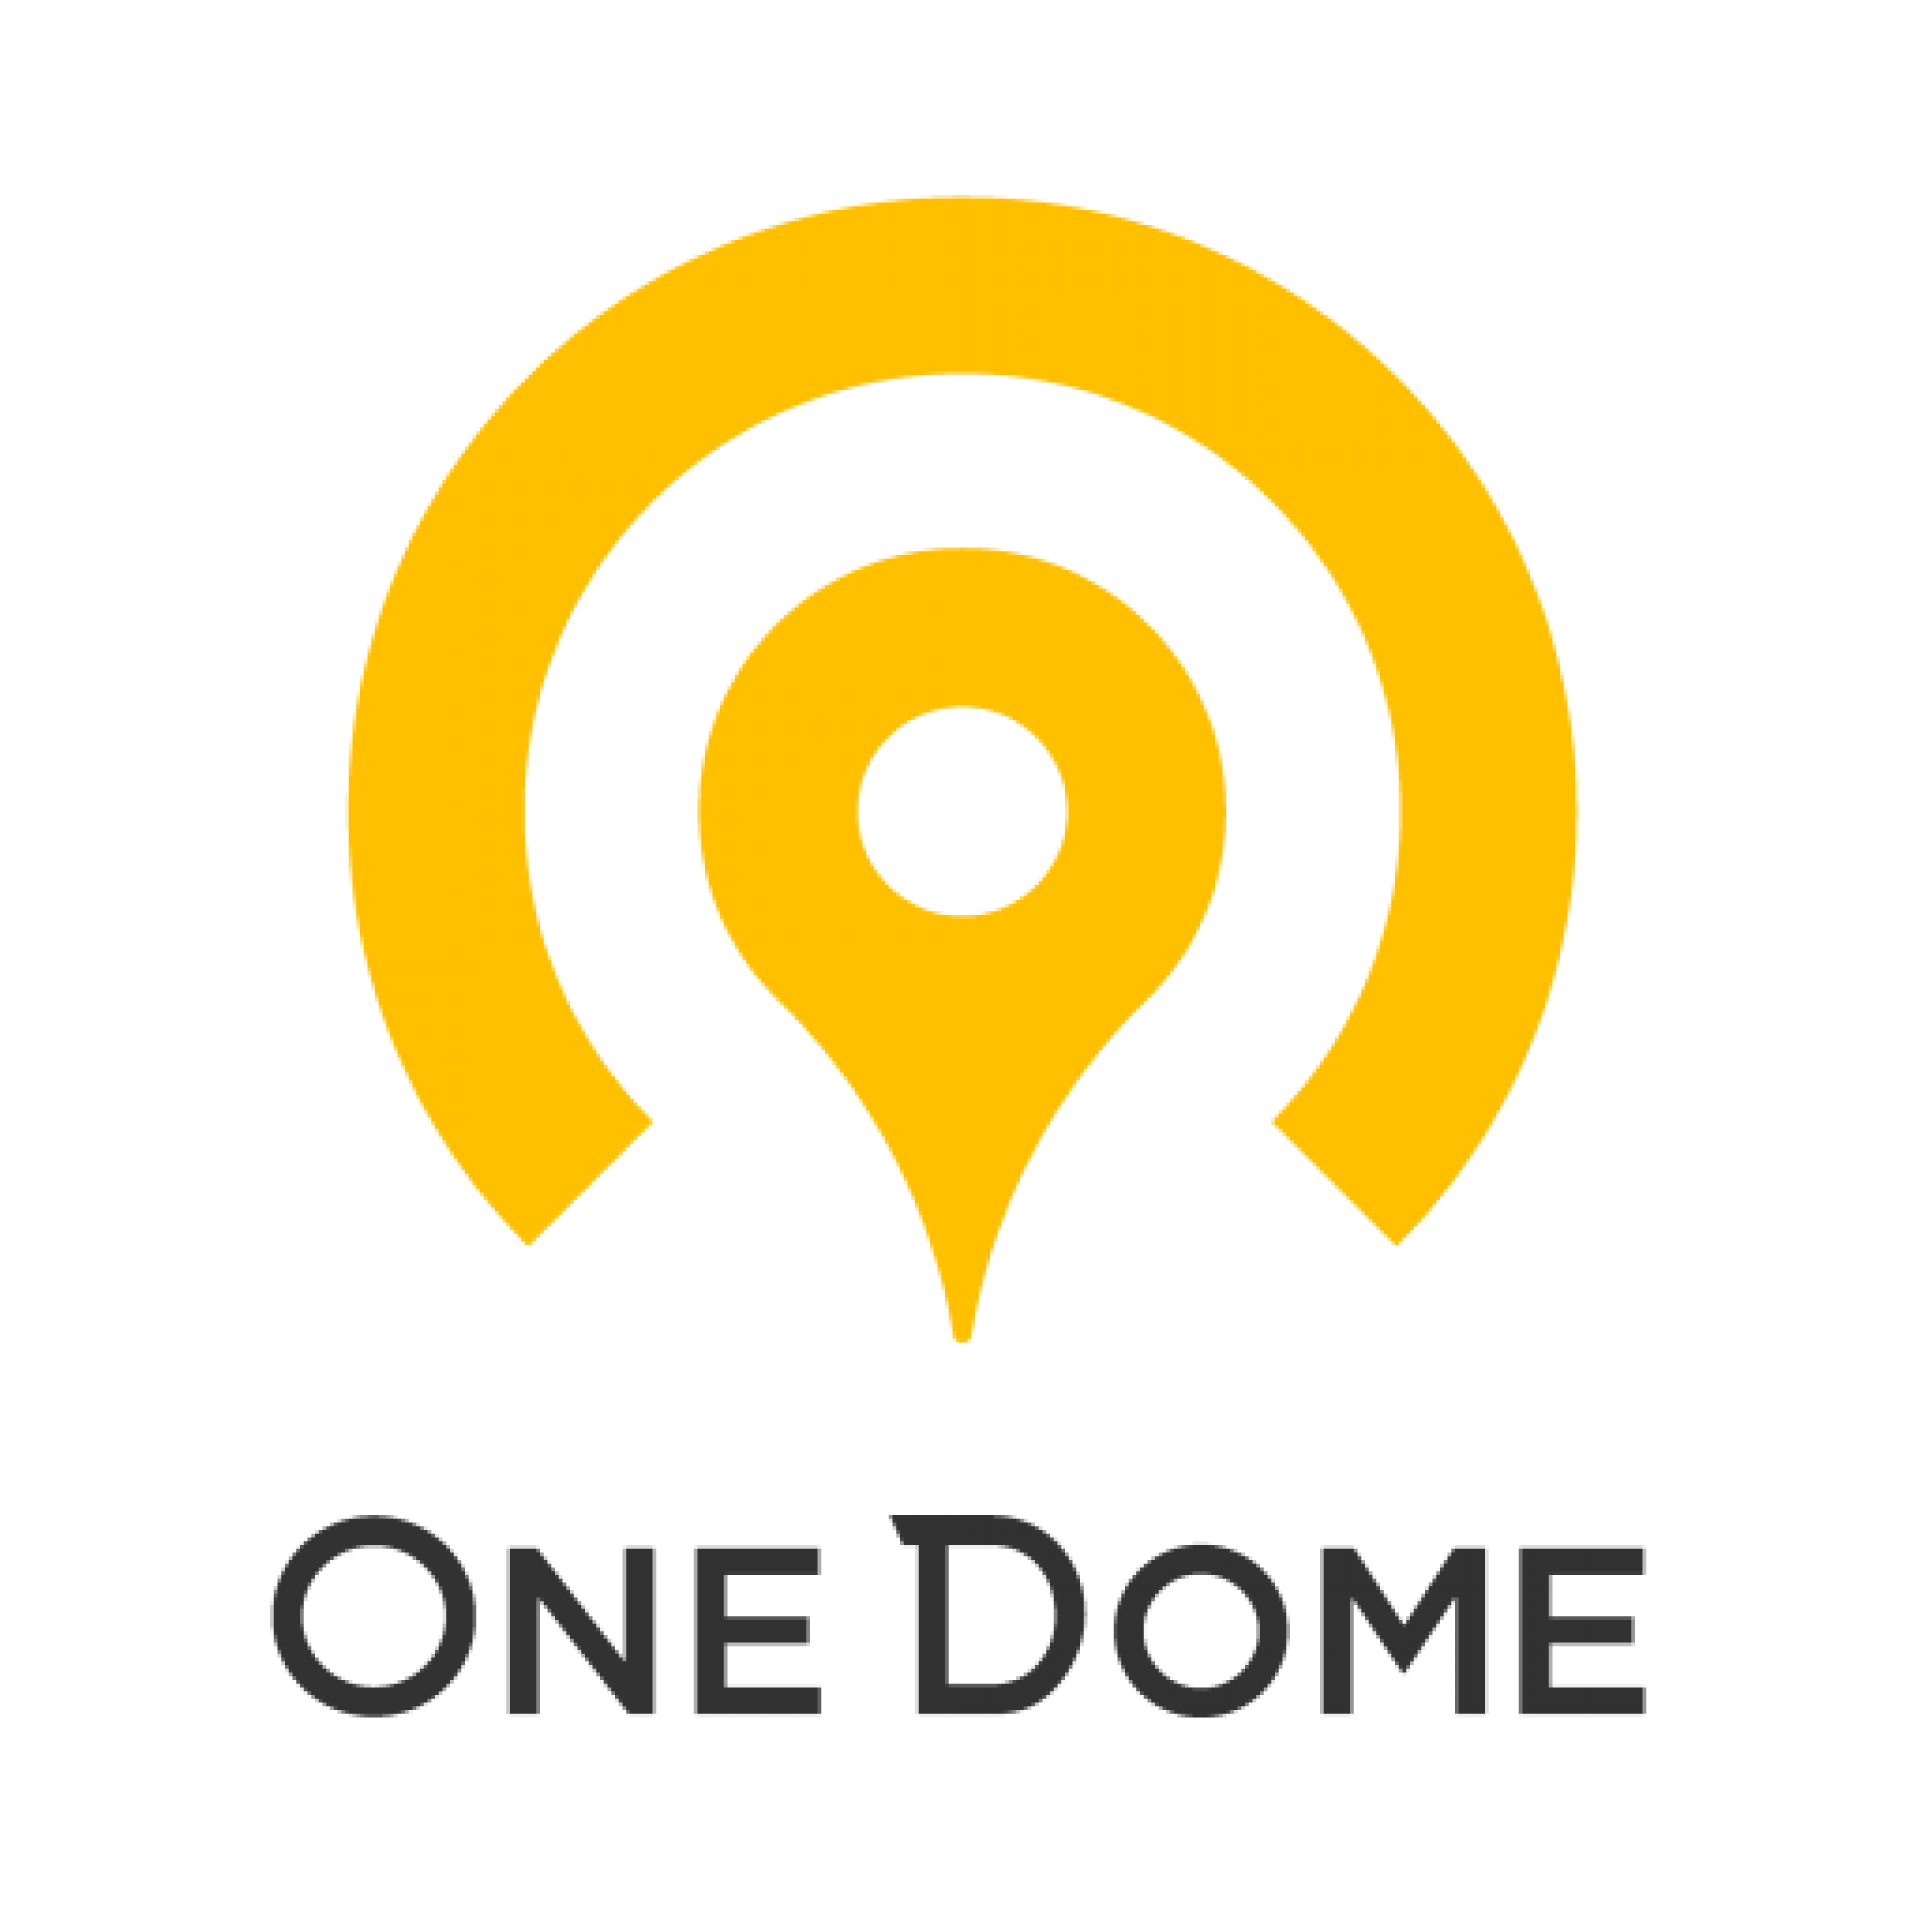 Dome Logo - Landlord's Checklist for Getting Started